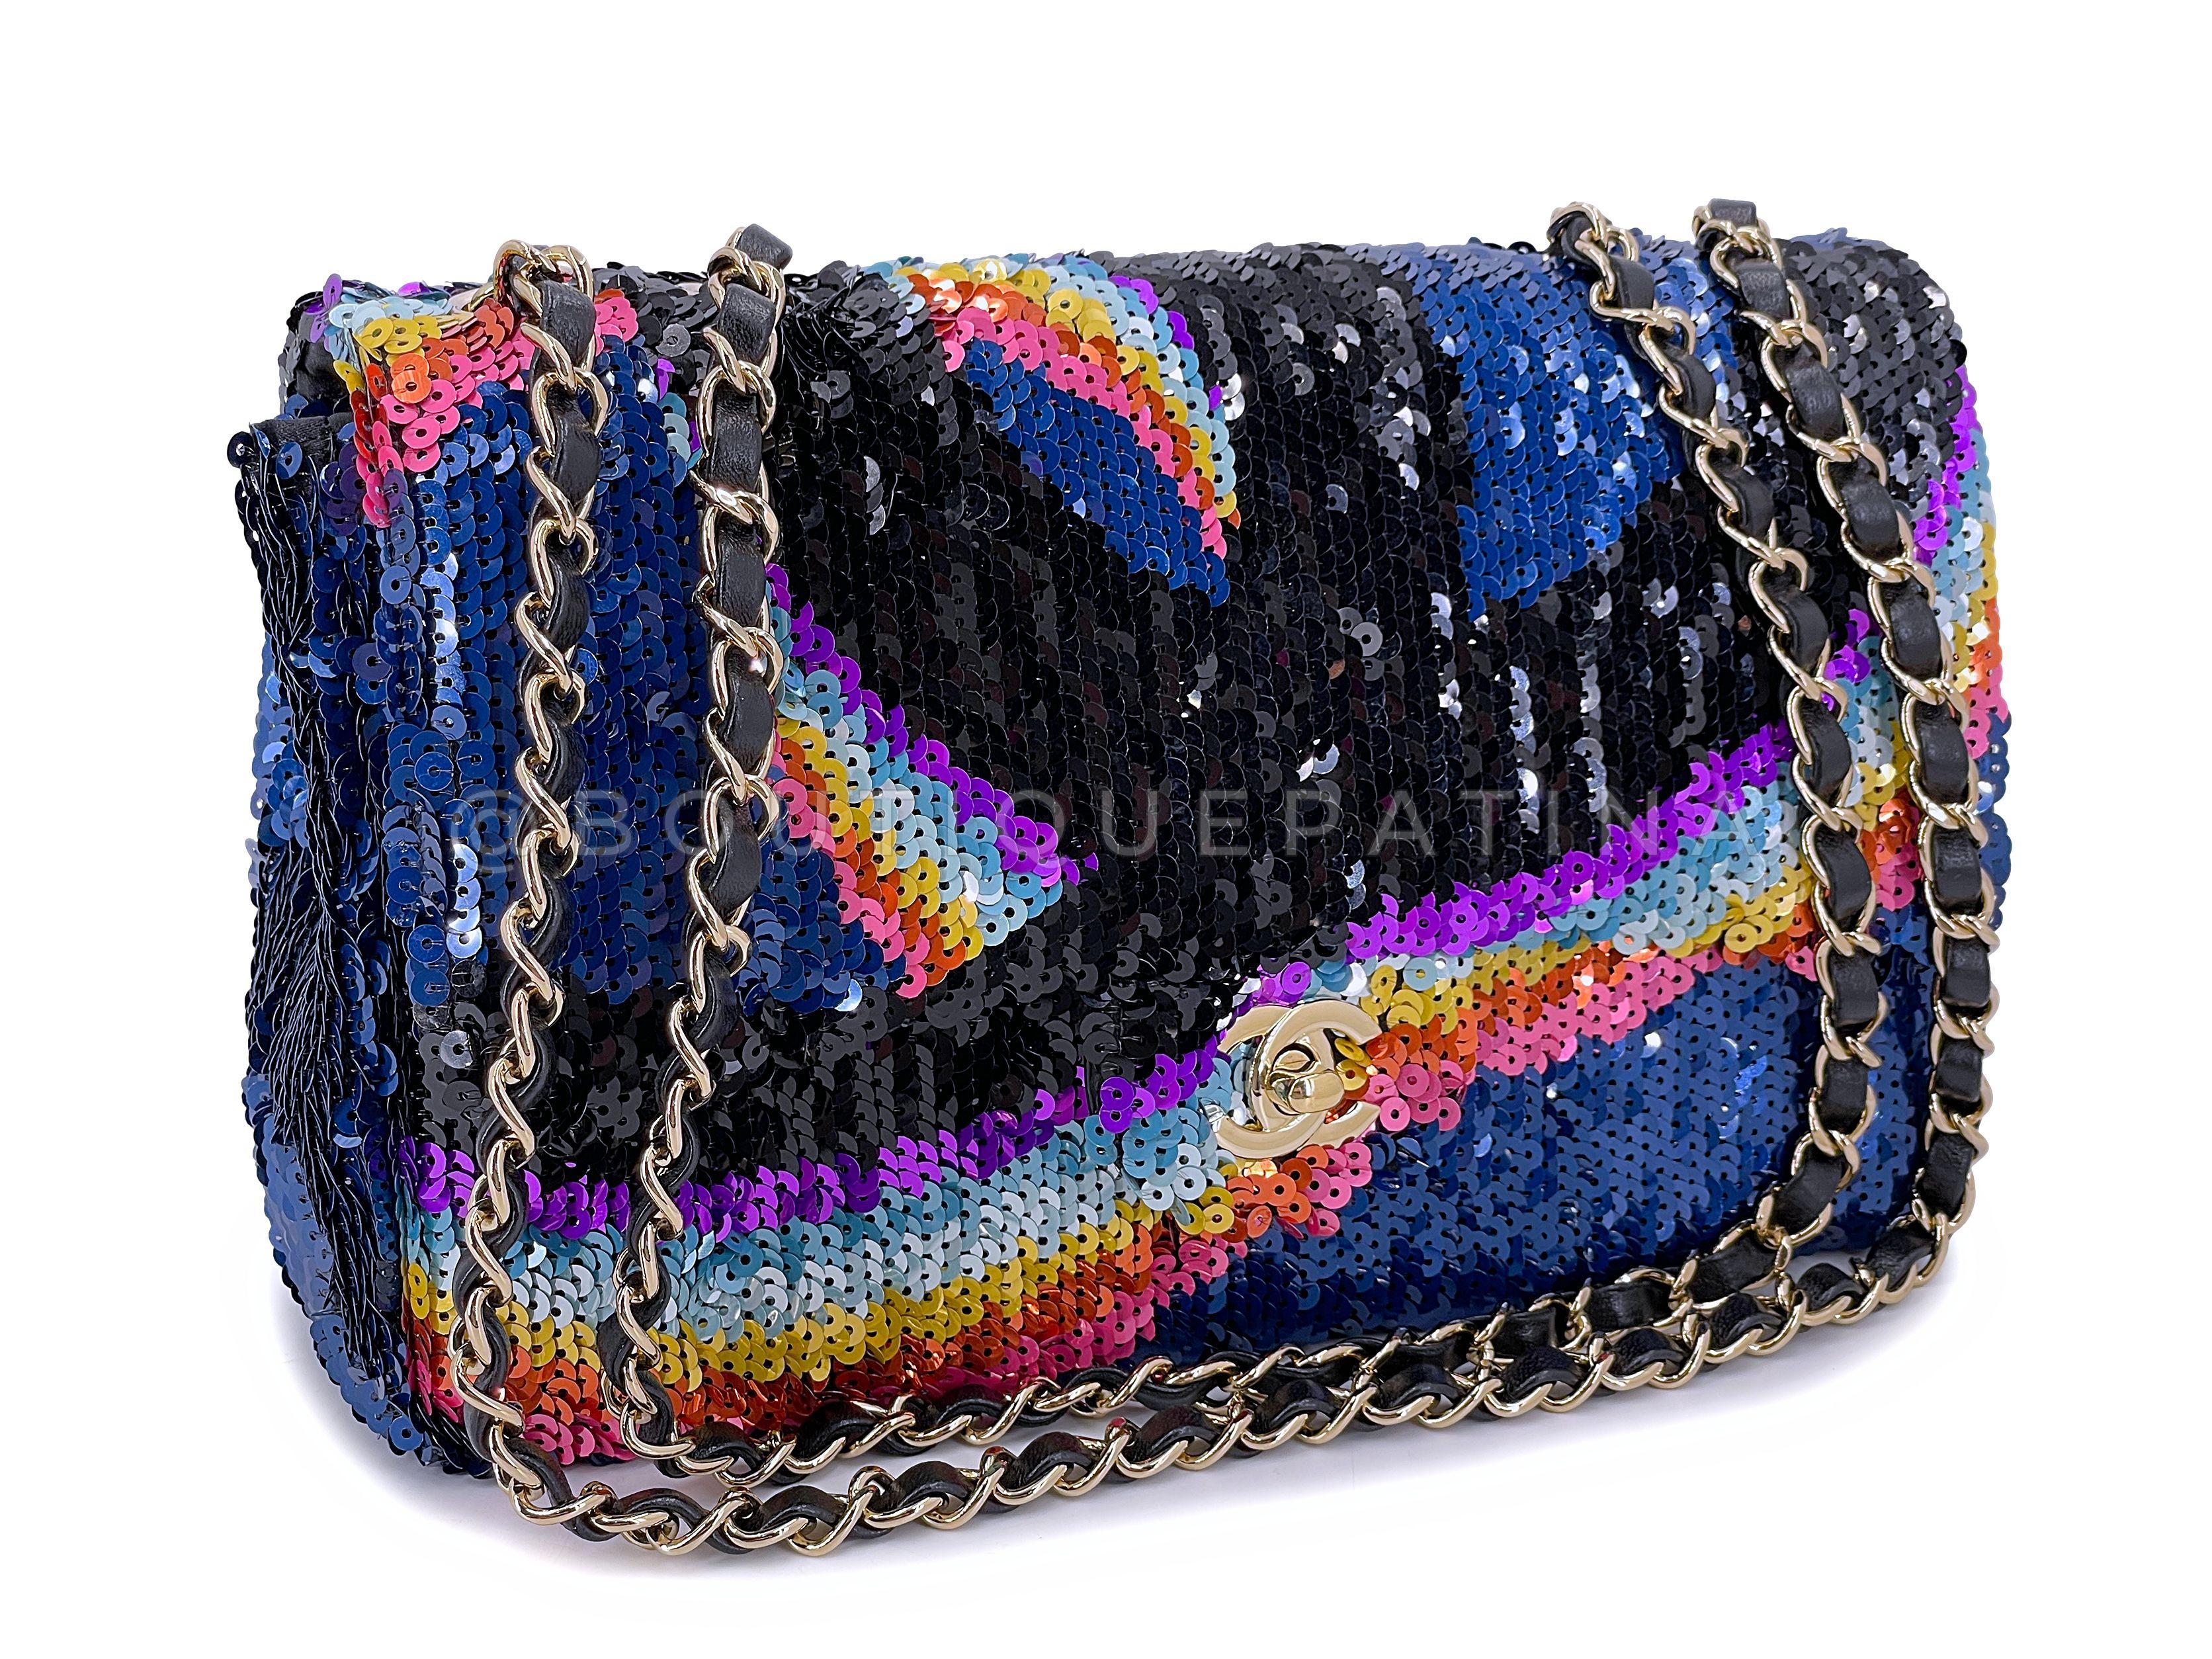 Chanel 21K Medium Rainbow Sequin Flap Bag 67259 In Excellent Condition For Sale In Costa Mesa, CA